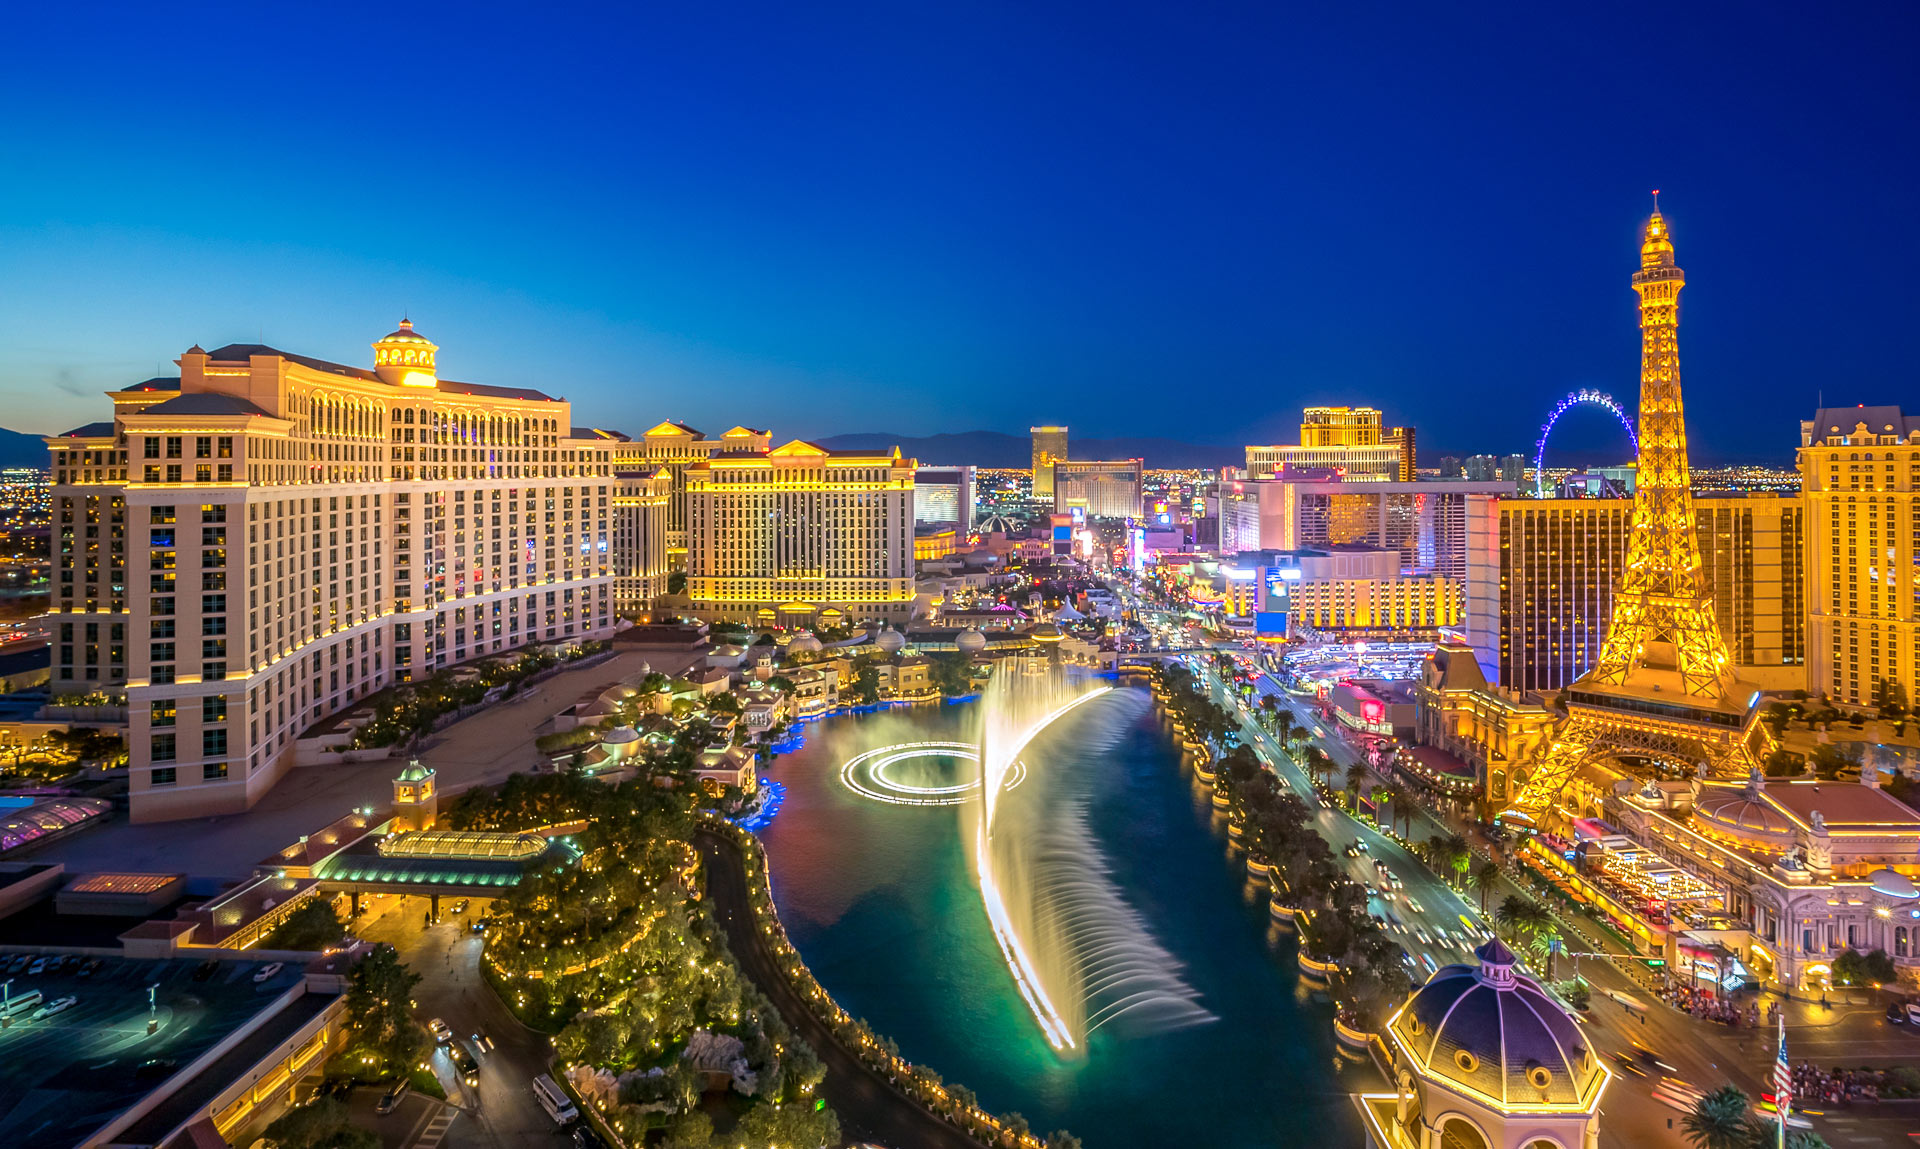 Las Vegas Strip: The 15 attractions you must see